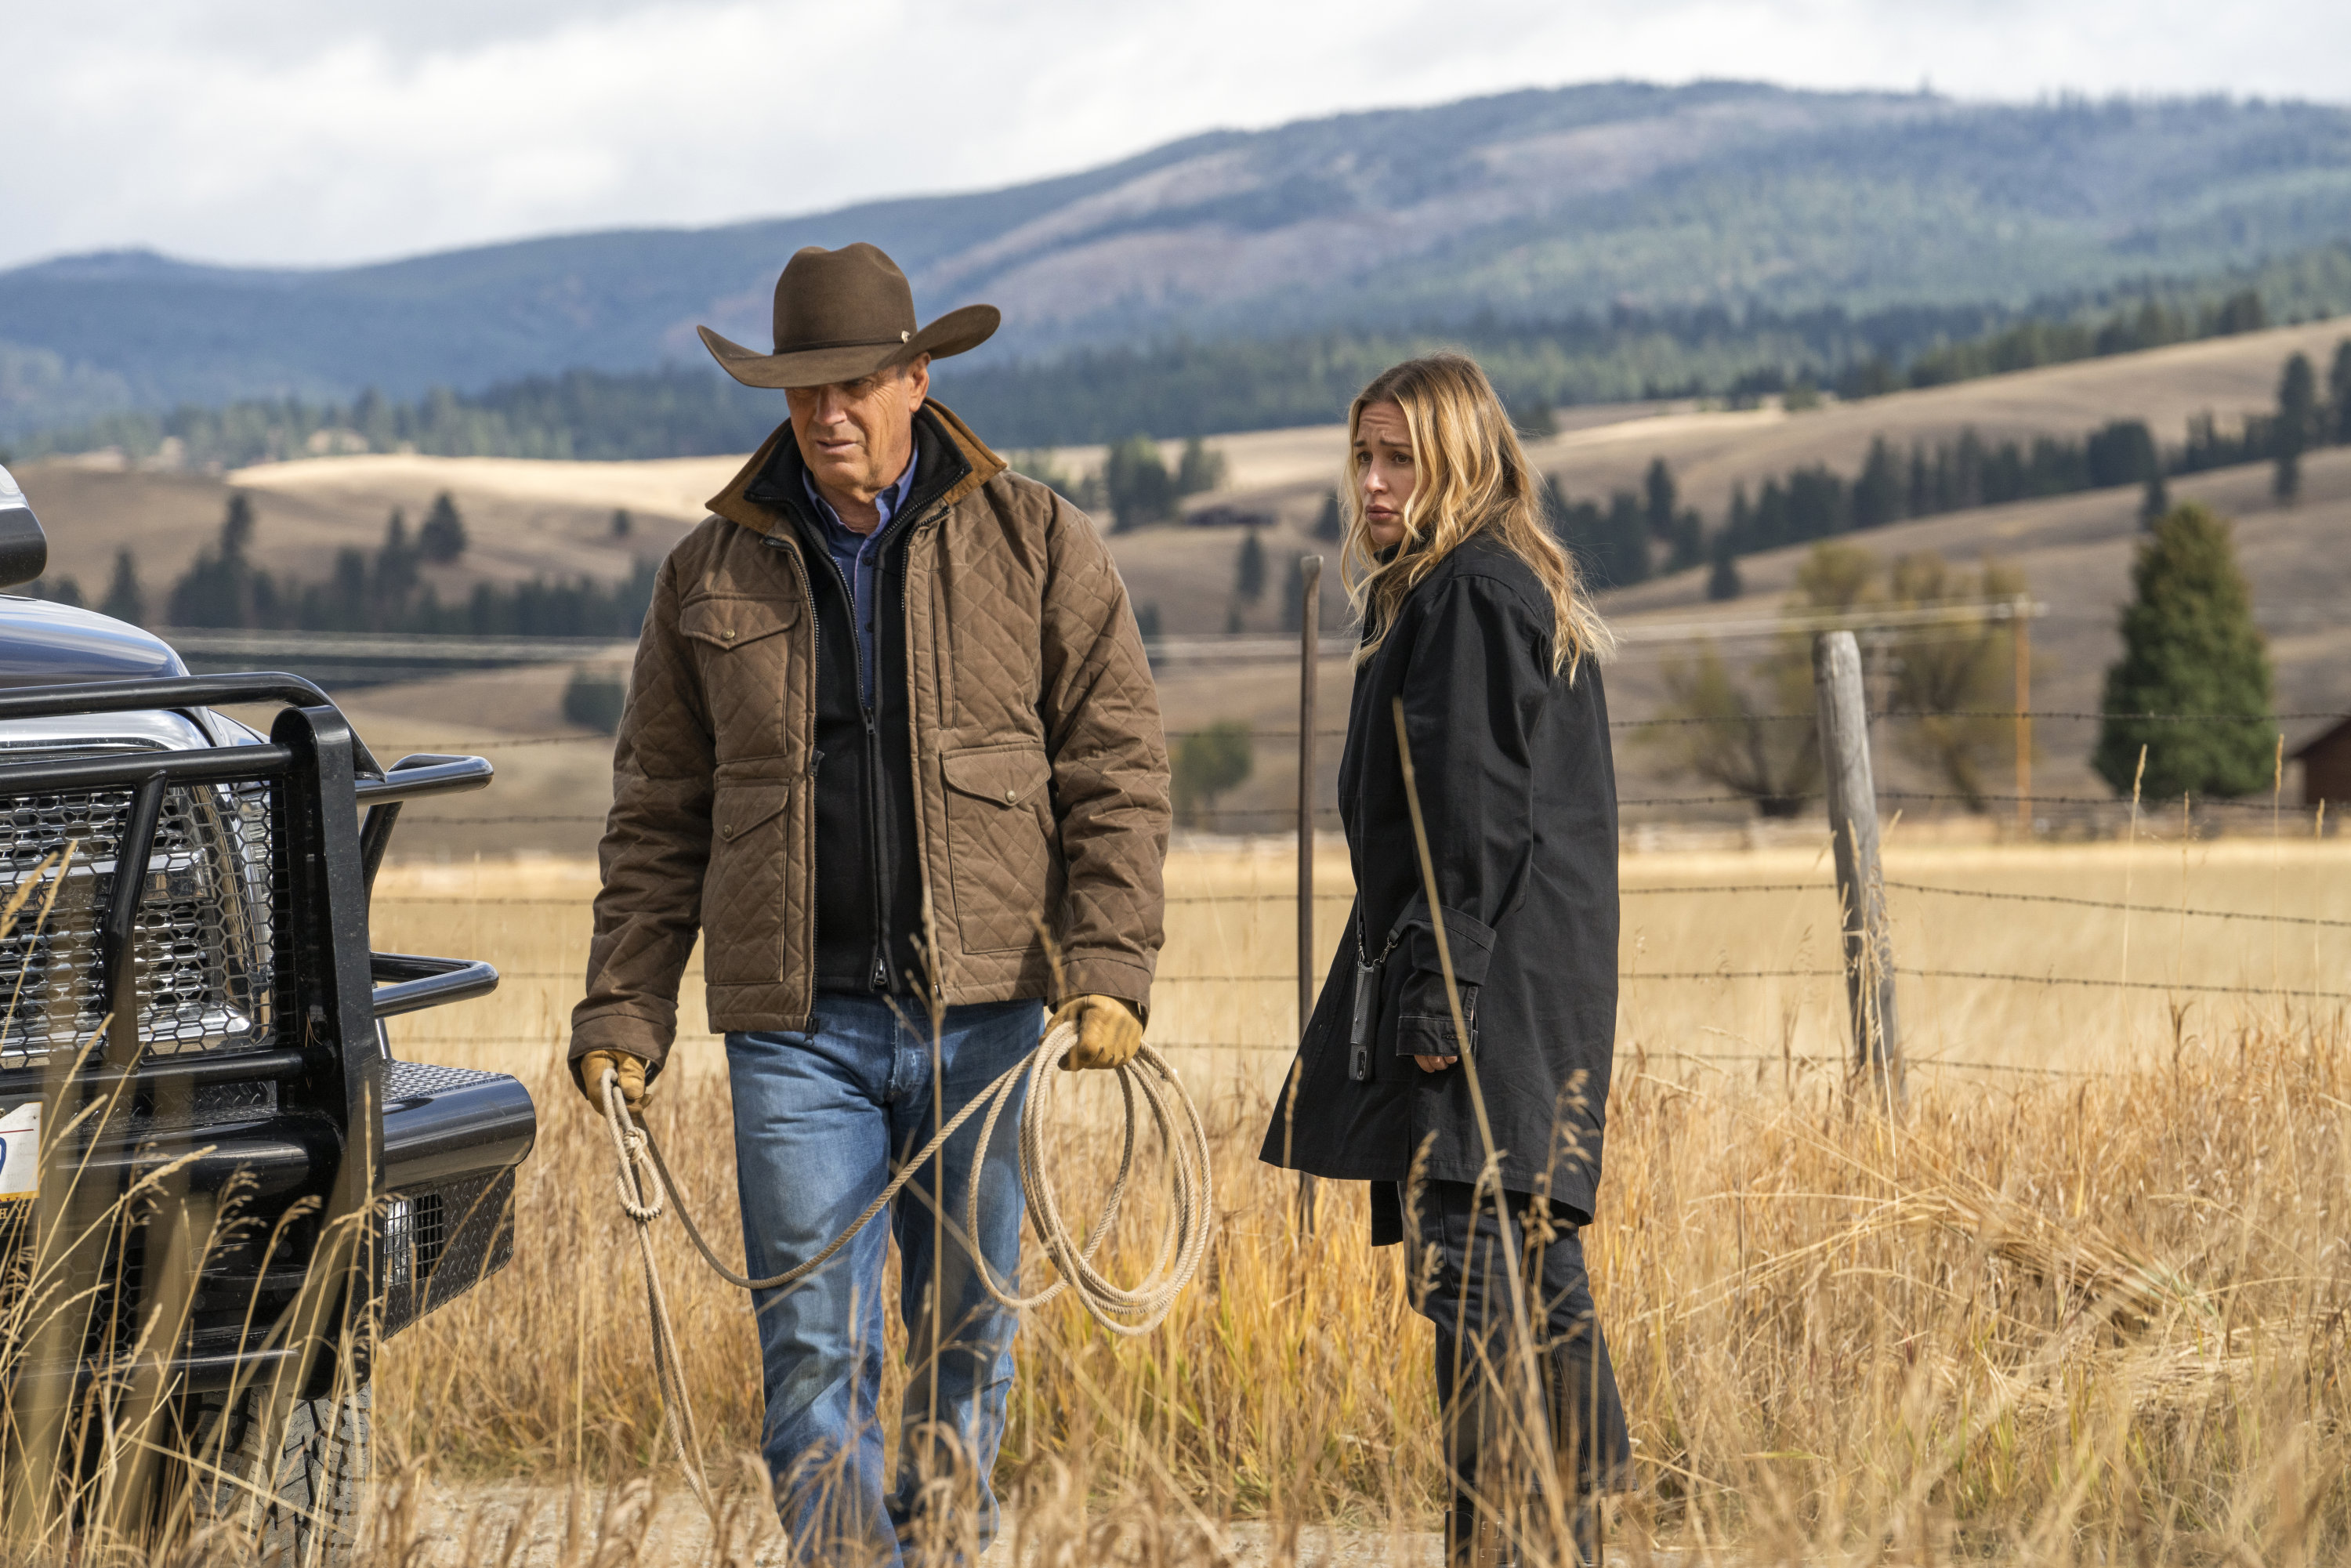 quot;Yellowstone" season 4, starring Kevin Costner, Wes Bentley, K...